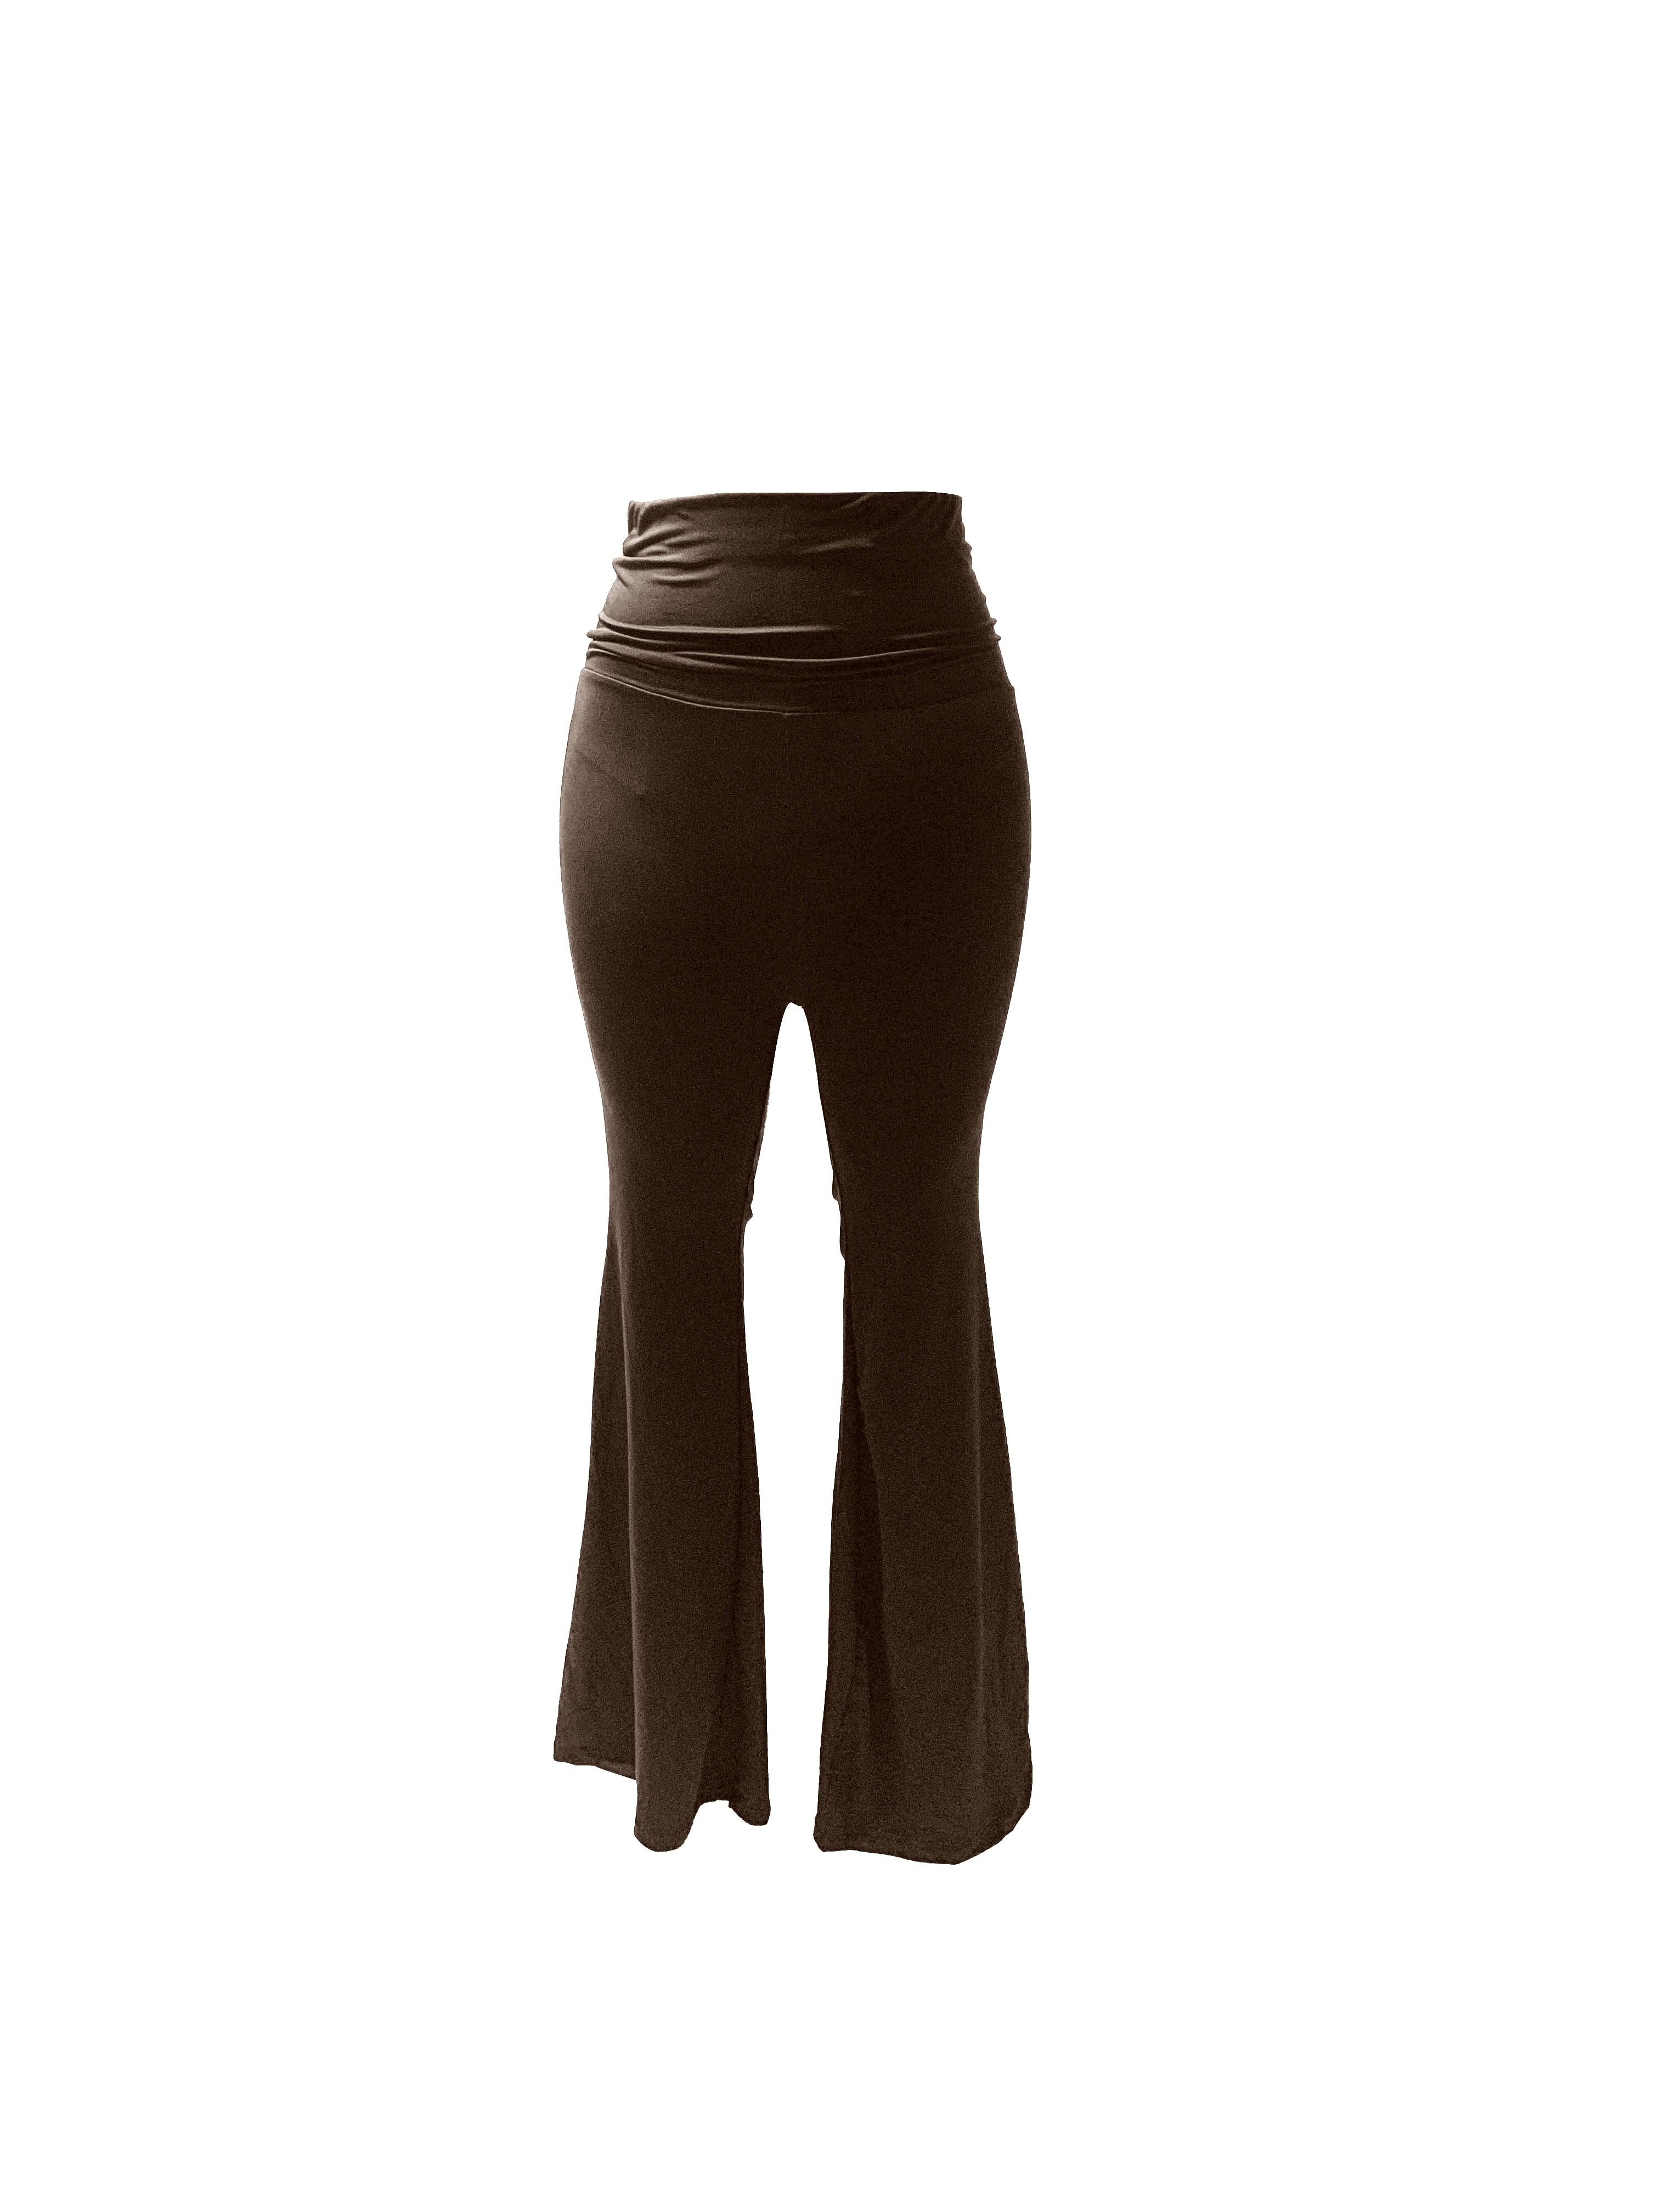 Brown Flared Leggings, Women's Fashion, Bottoms, Other Bottoms on